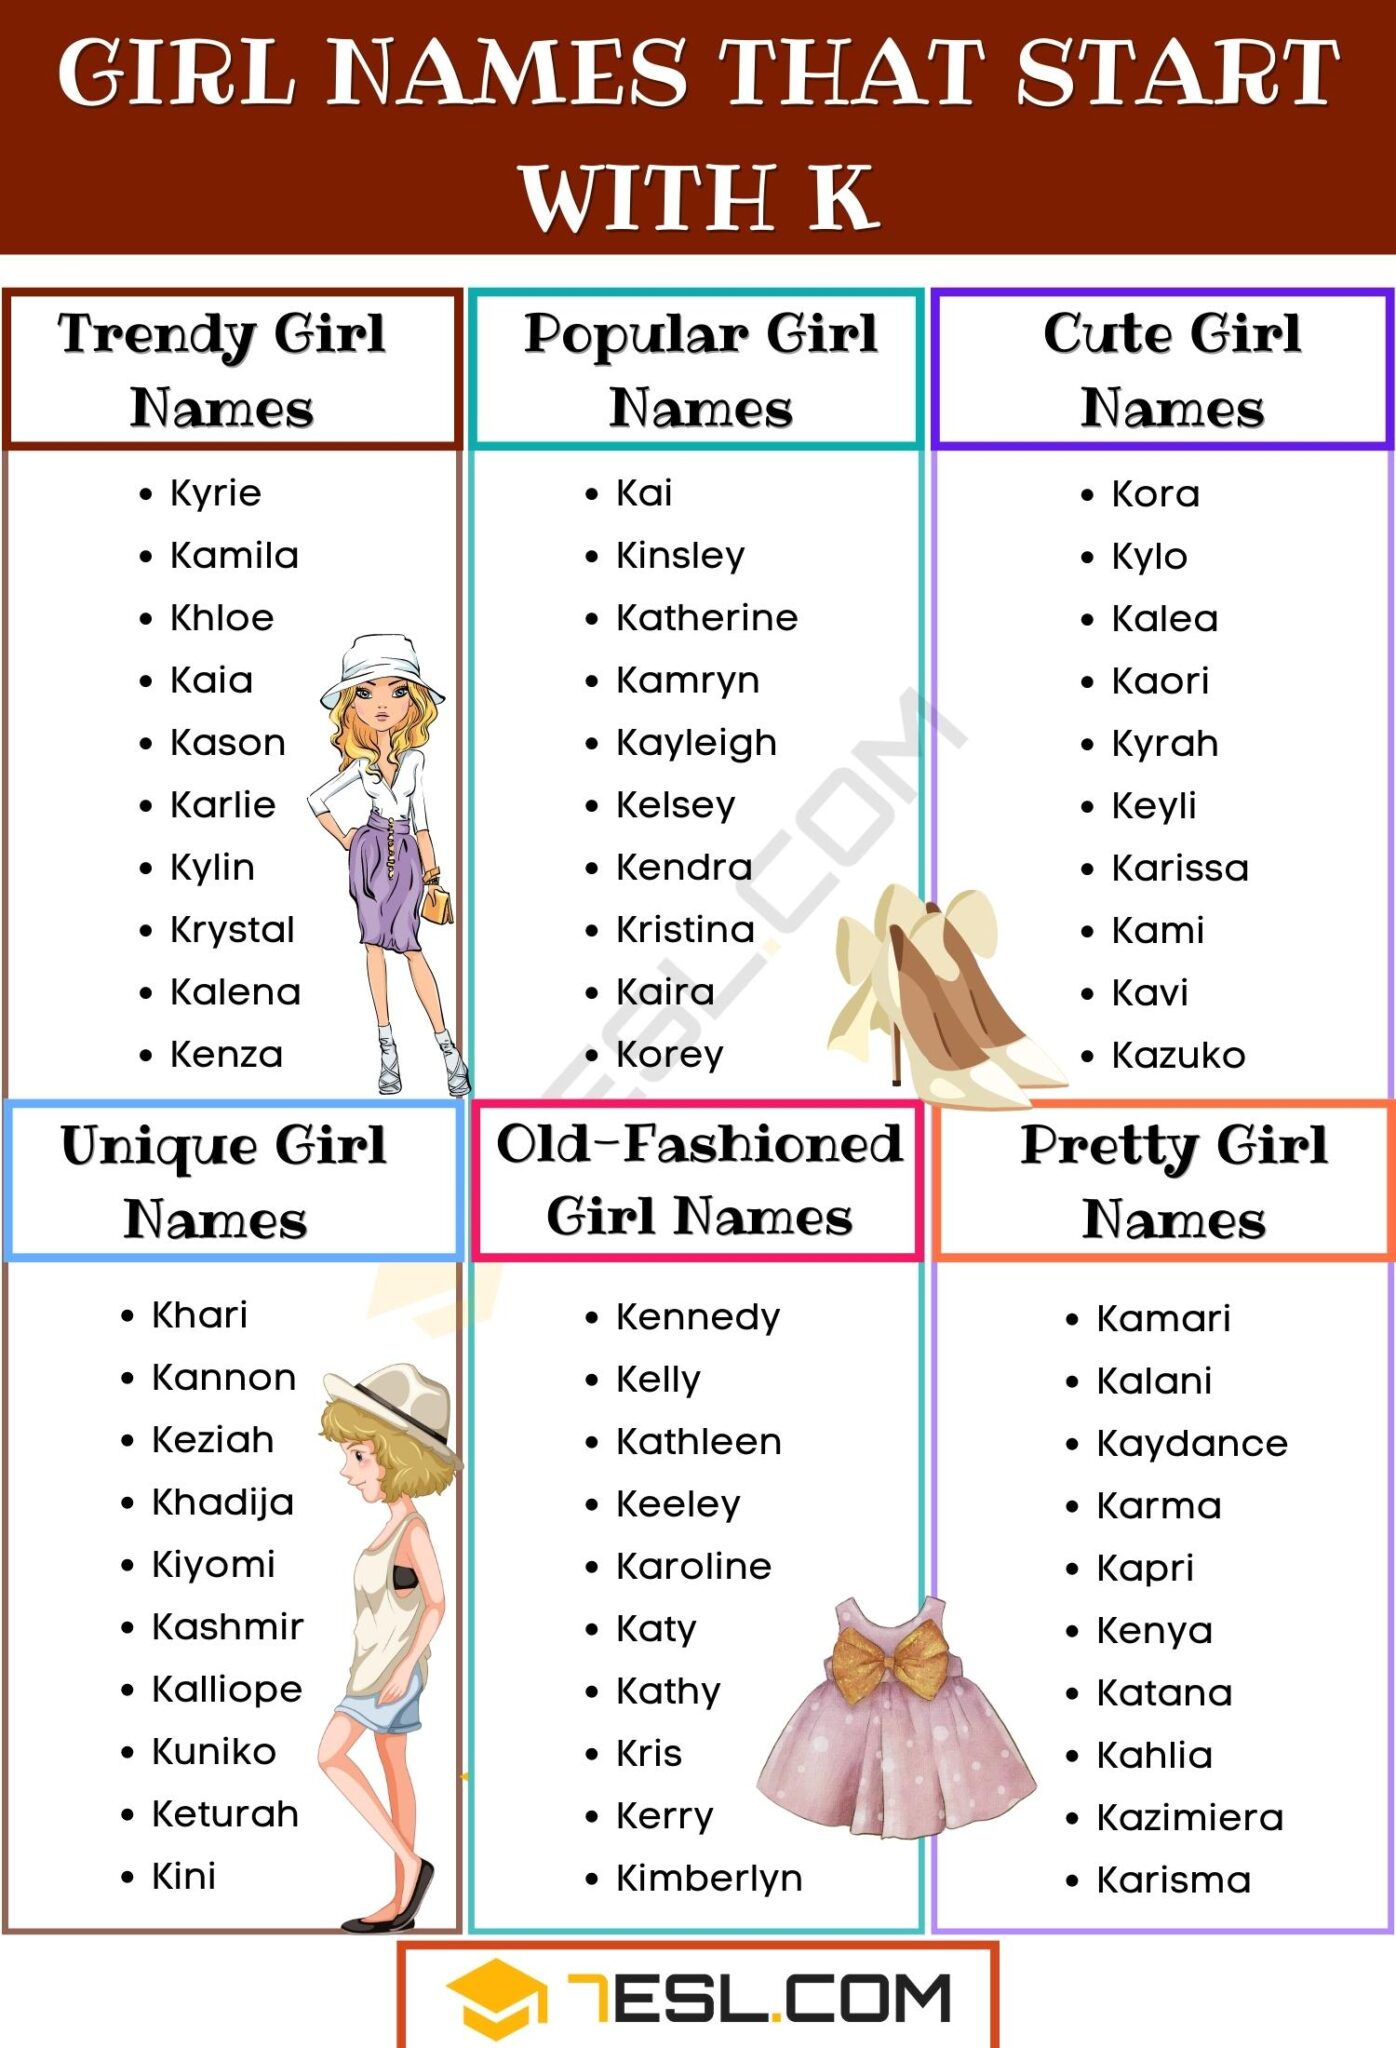 Rare Girl Names That Start With K